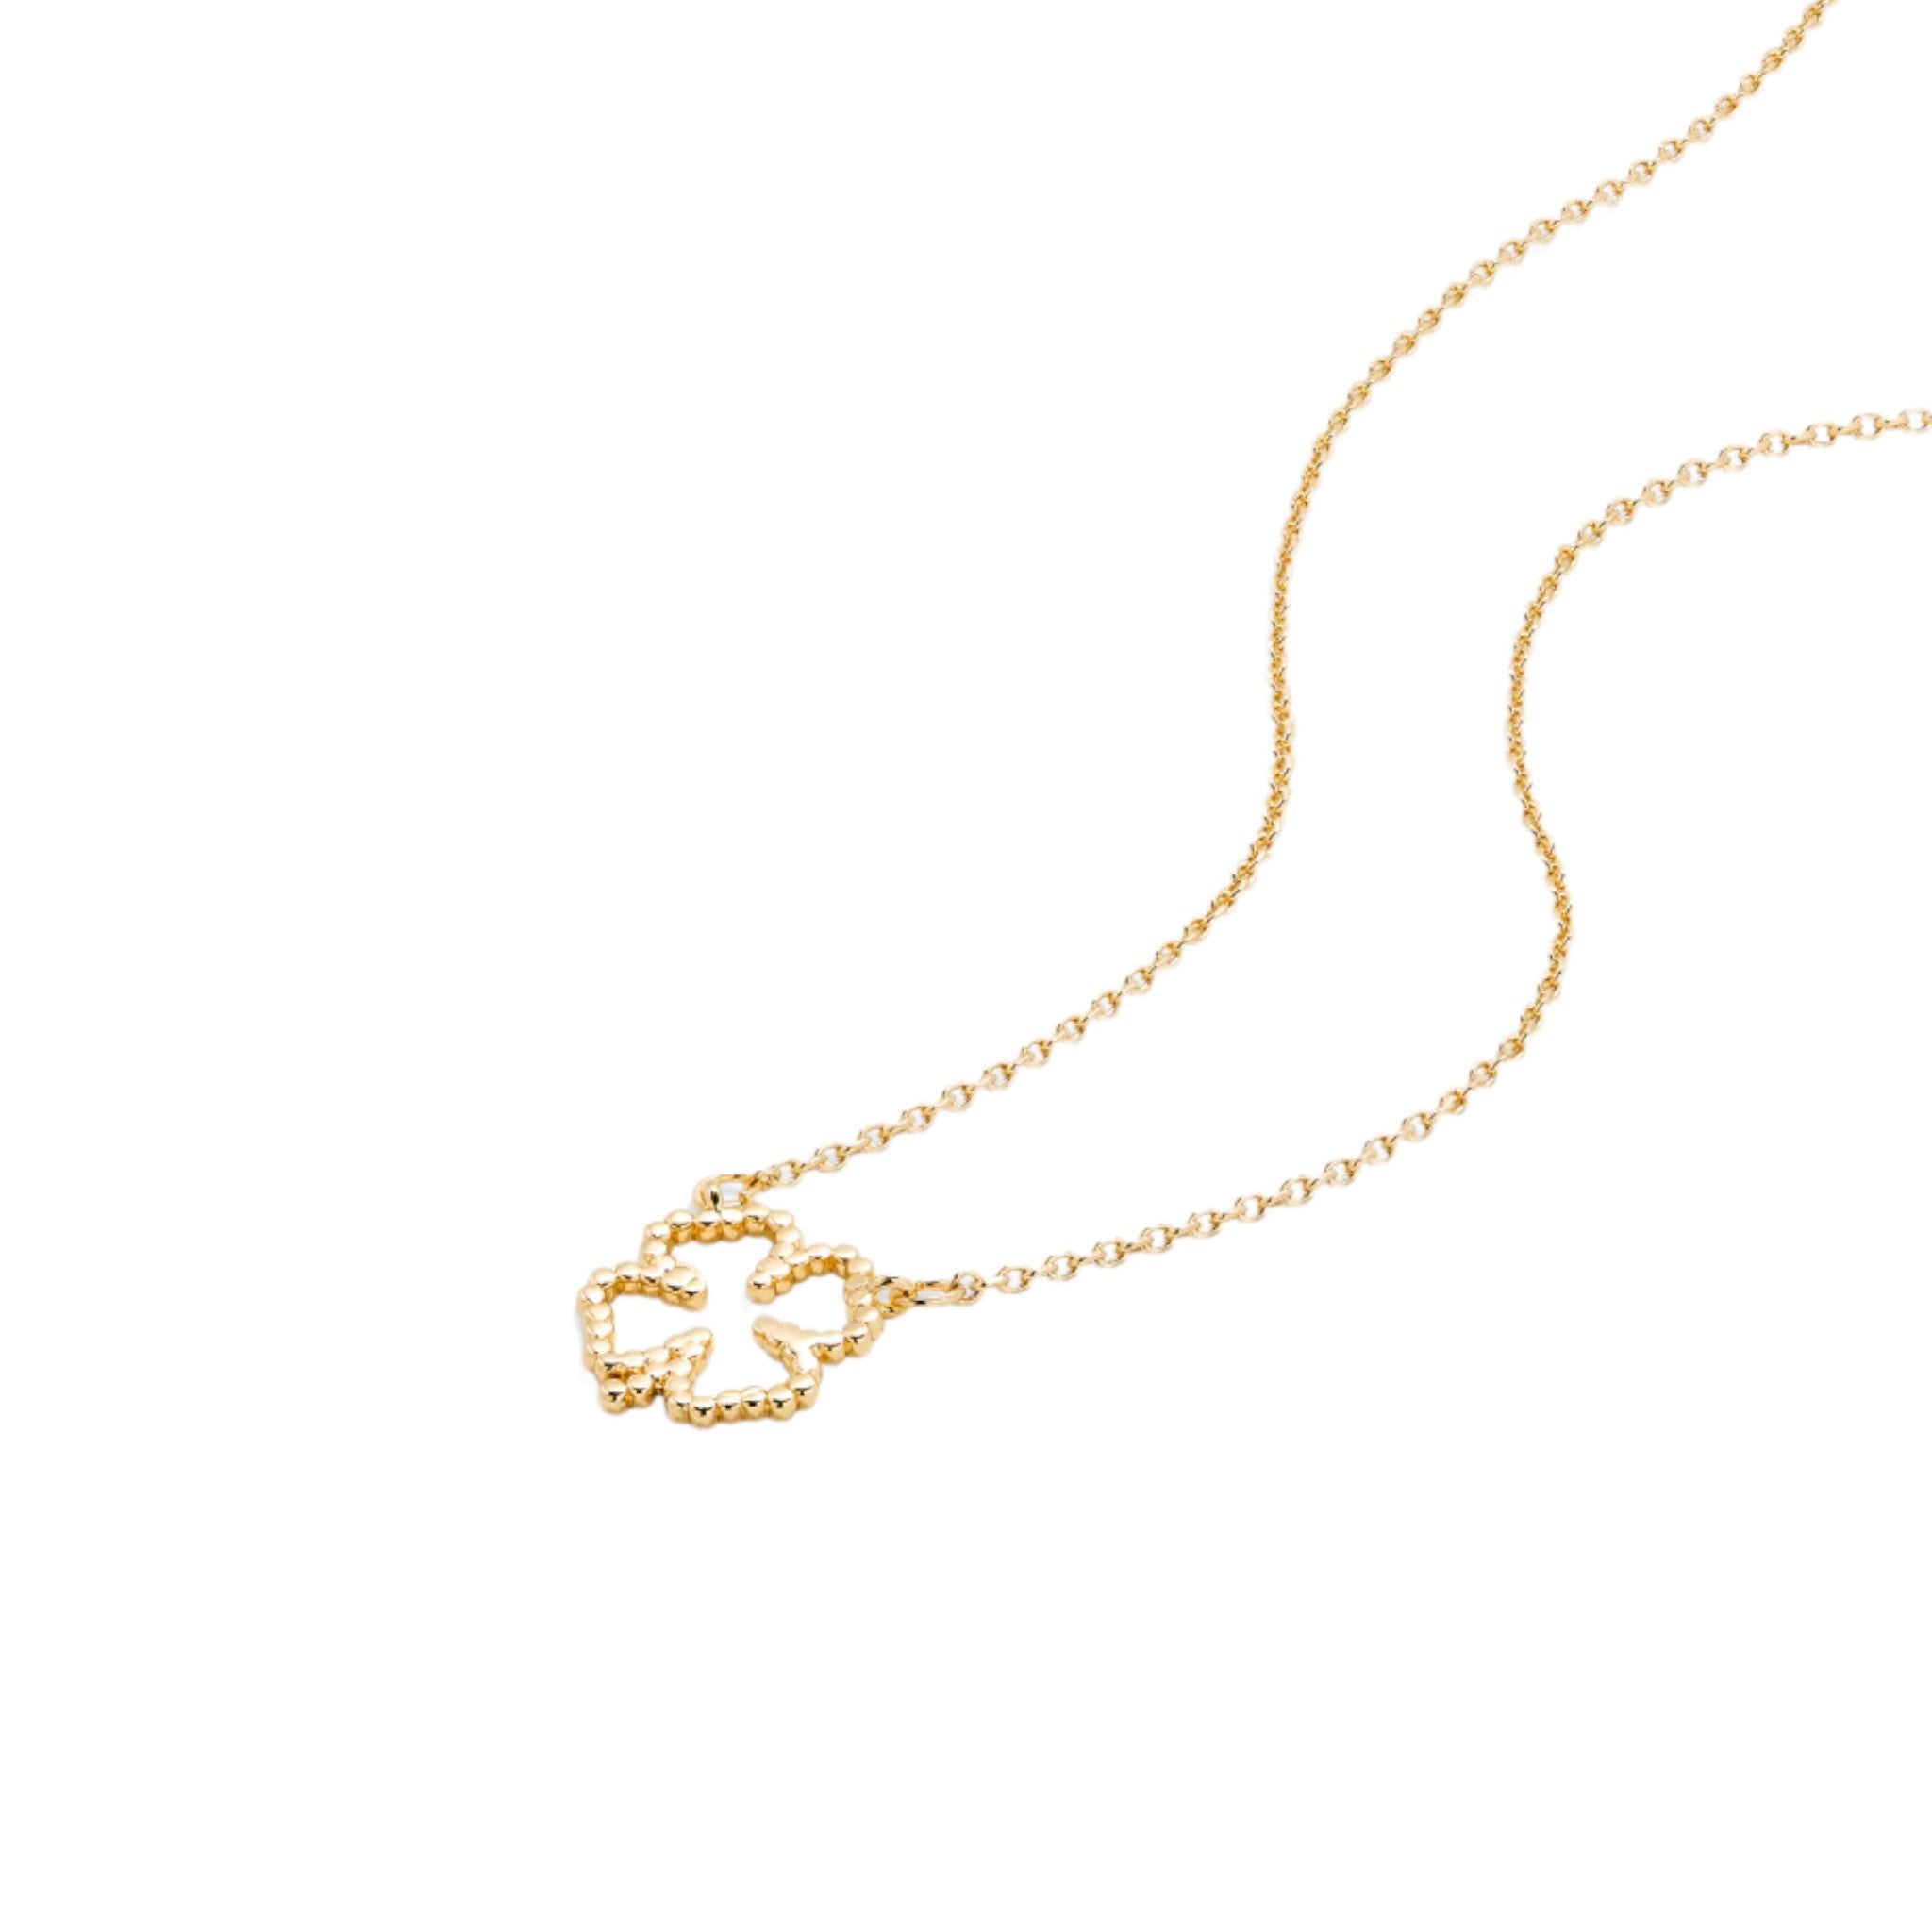 Bryan Anthonys - Just For Luck Clover Necklace - 14K Gold